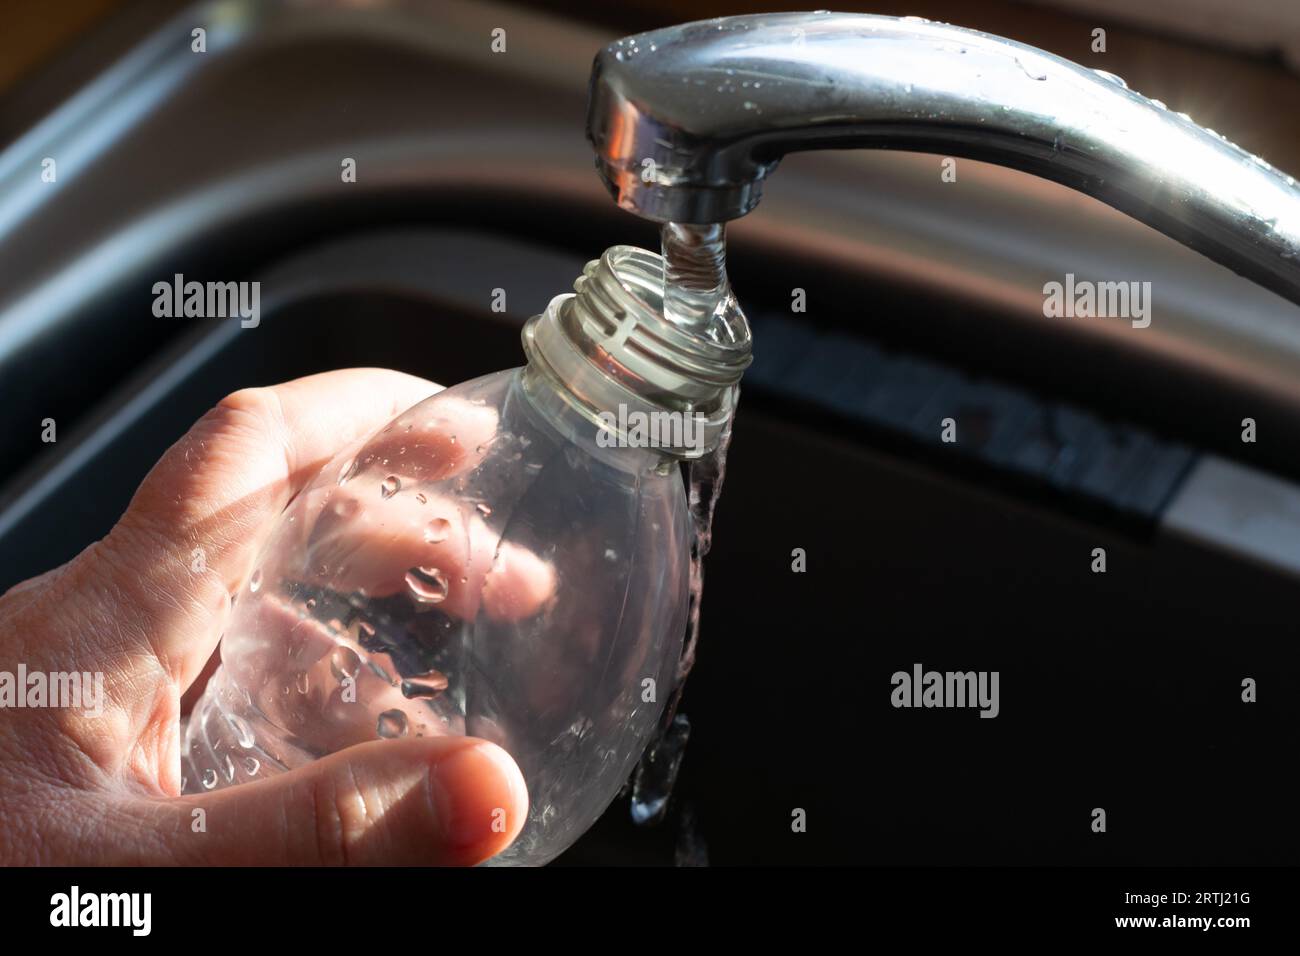 Refilling a plastic water bottle from mixer tap. Concept recycling, cost of living crisis, tap water purity. Stock Photo